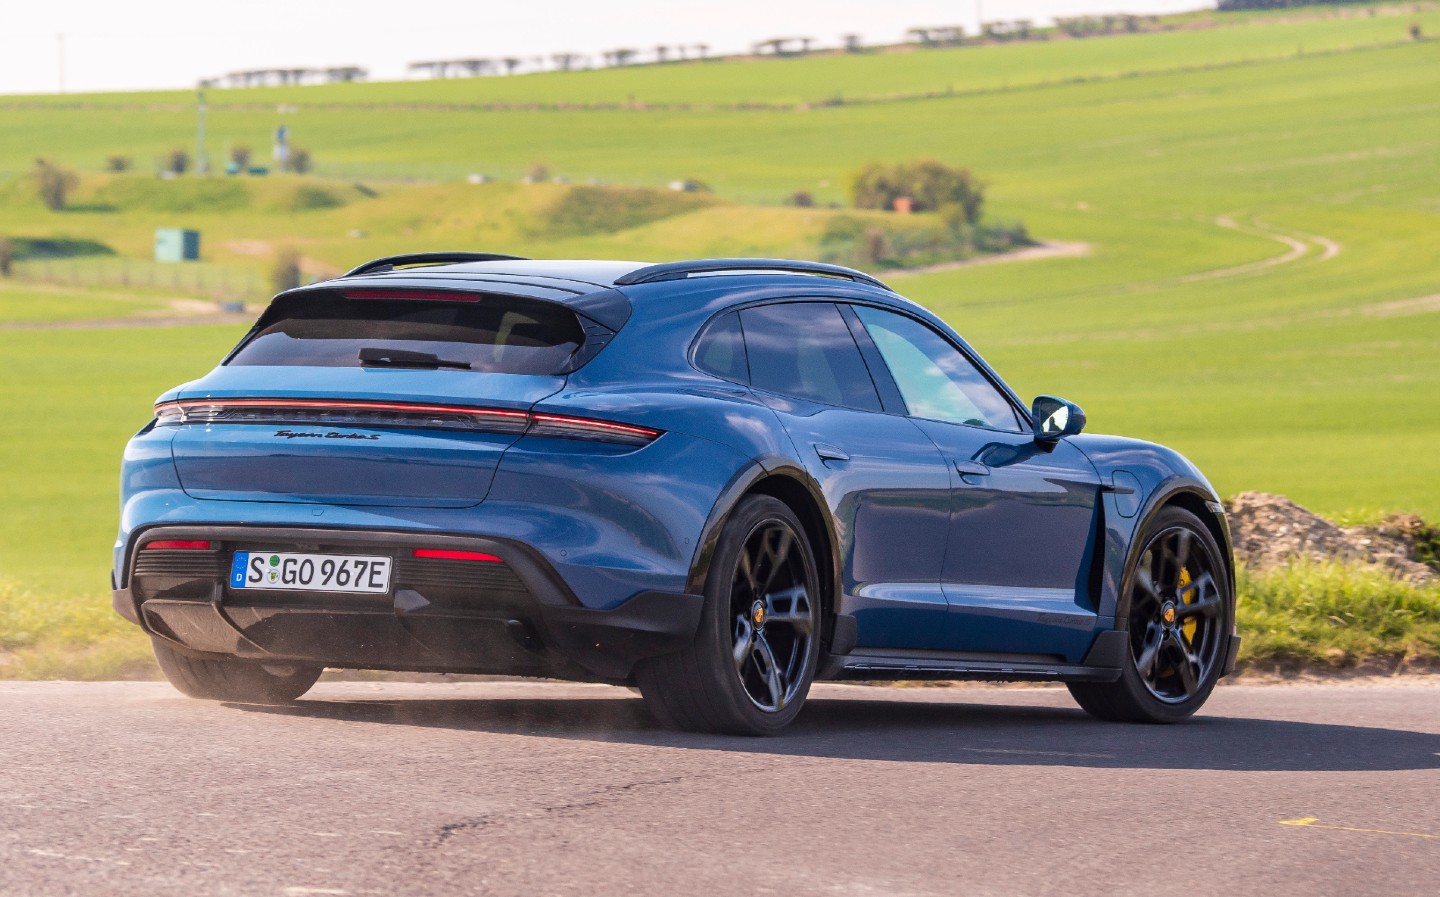 Porsche Taycan Turbo S Cross Turismo review by Will Dron for Sunday Times Driving.co.uk